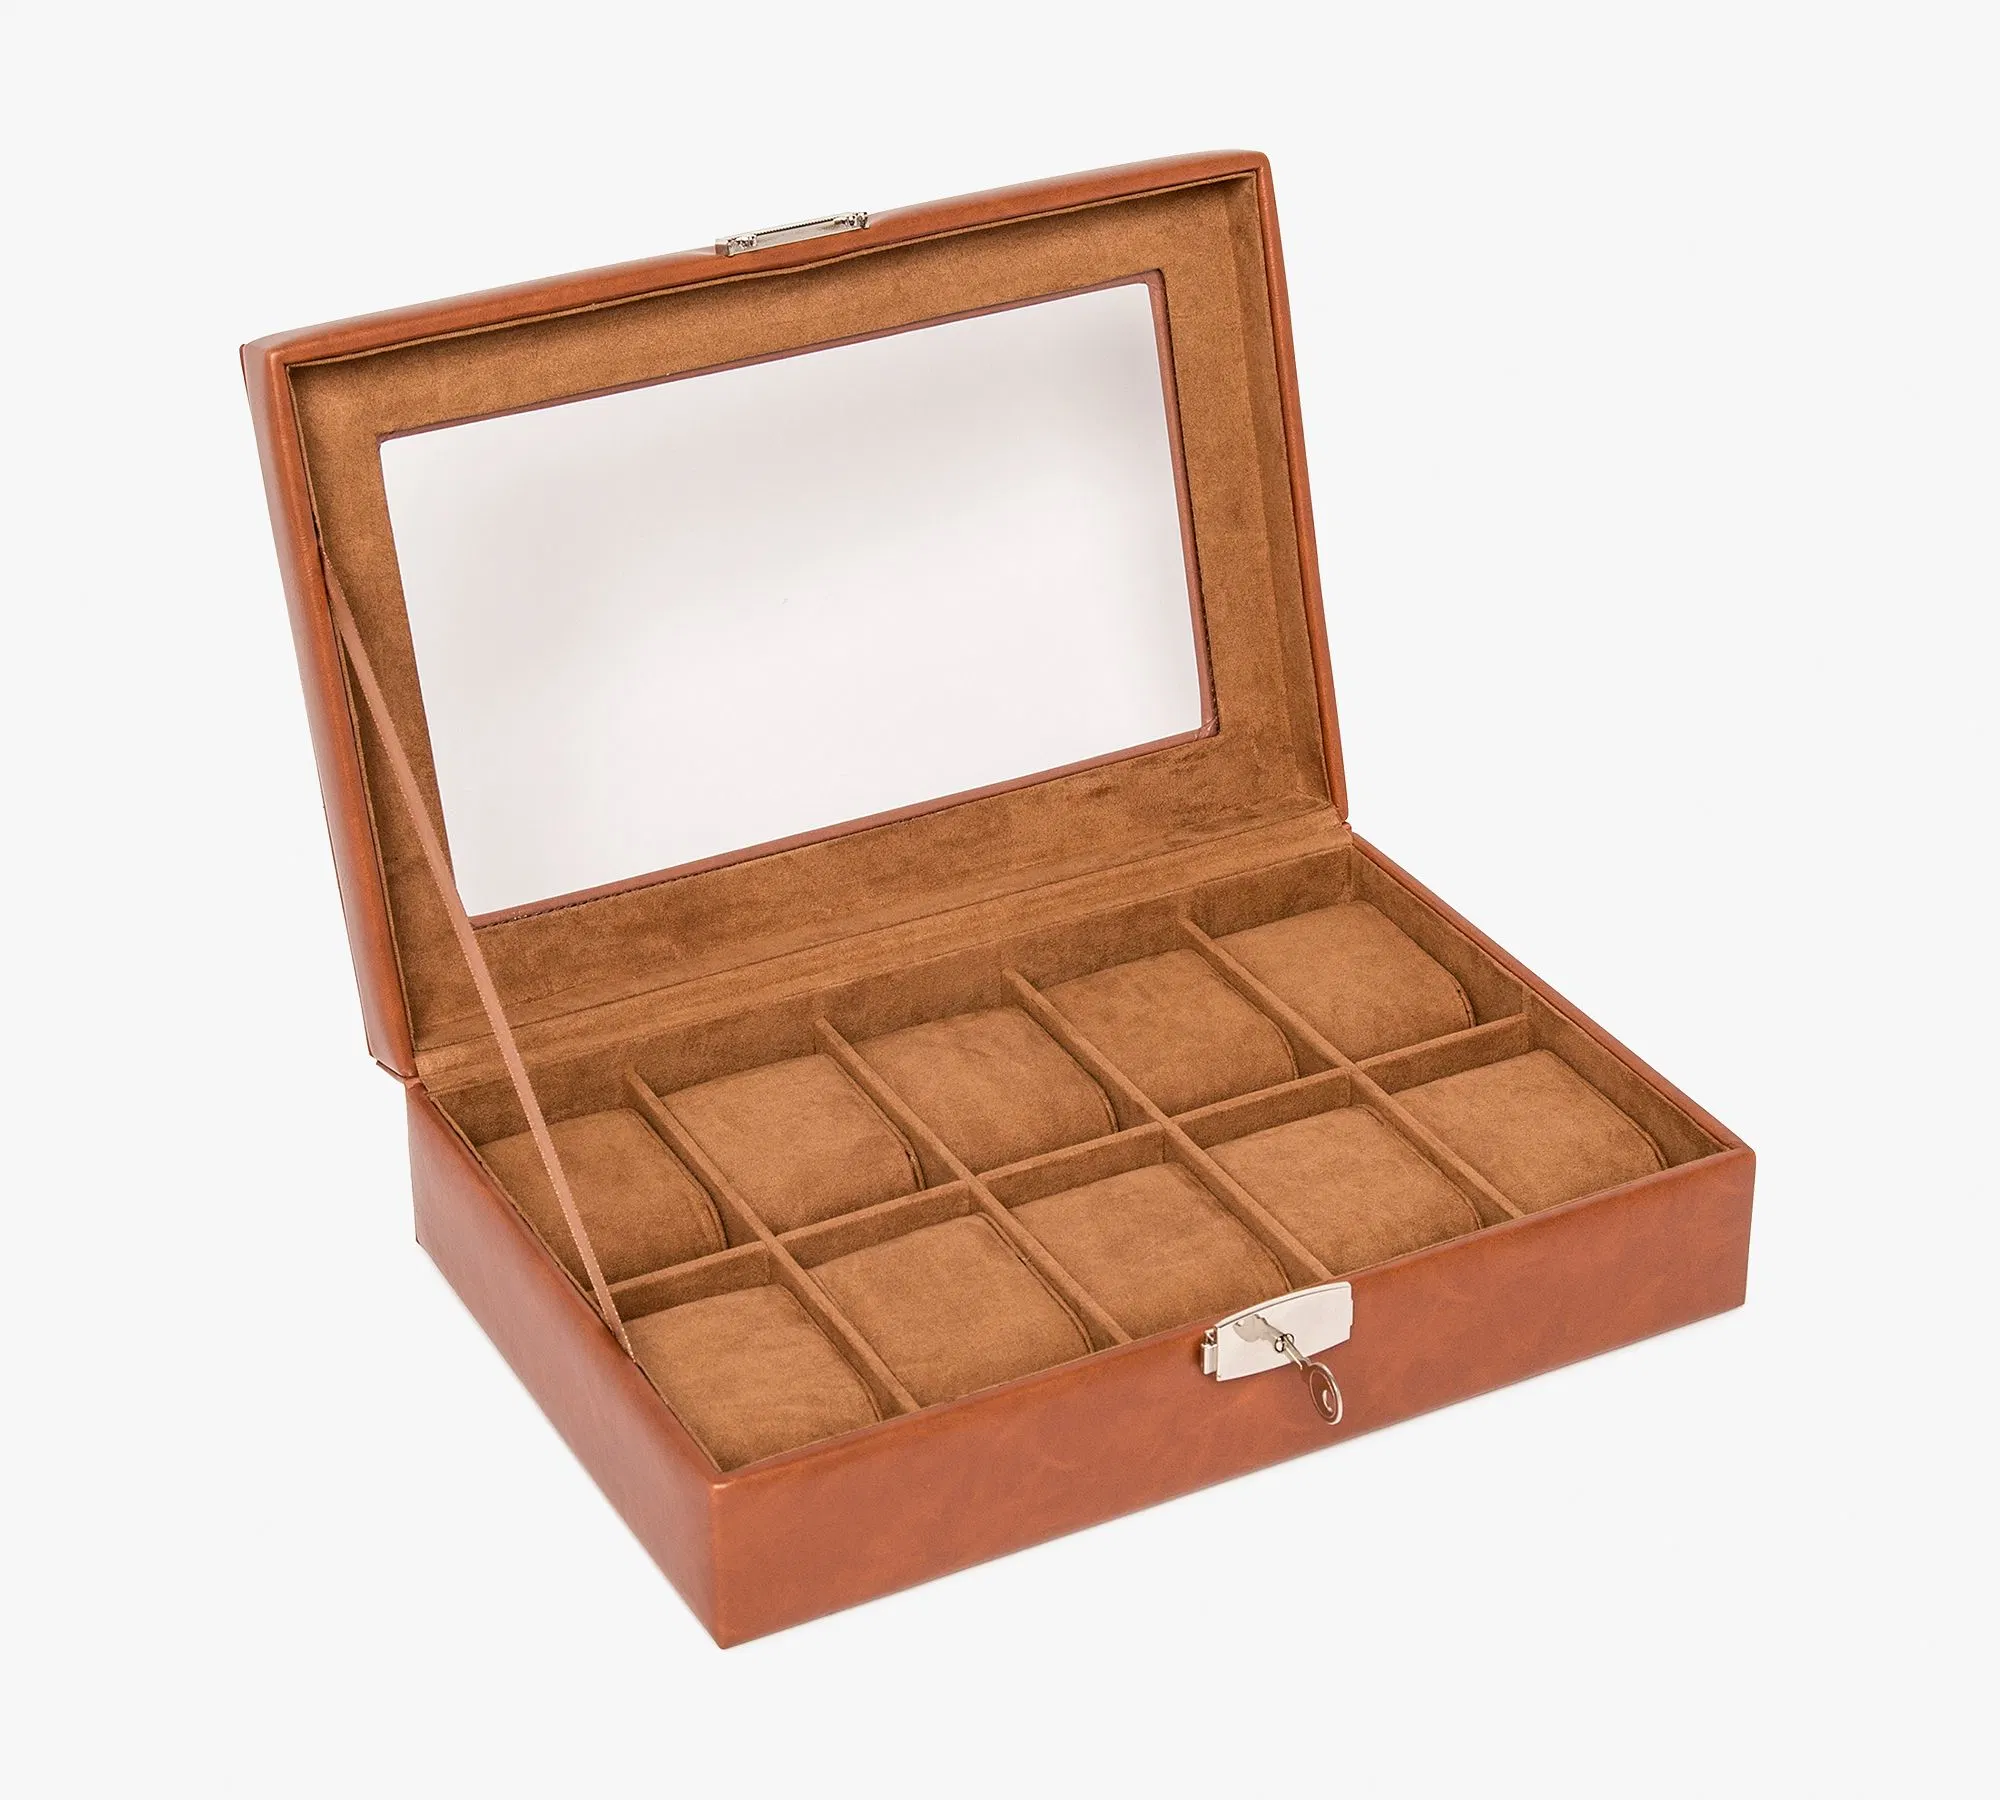 Luxury Custom Logo Popular Wooden Watch Packaging Case Wooden Leather Set Box Storage Gift Watch Box Packaging in Stock Manufacturer Fob Price Ndmwr-04